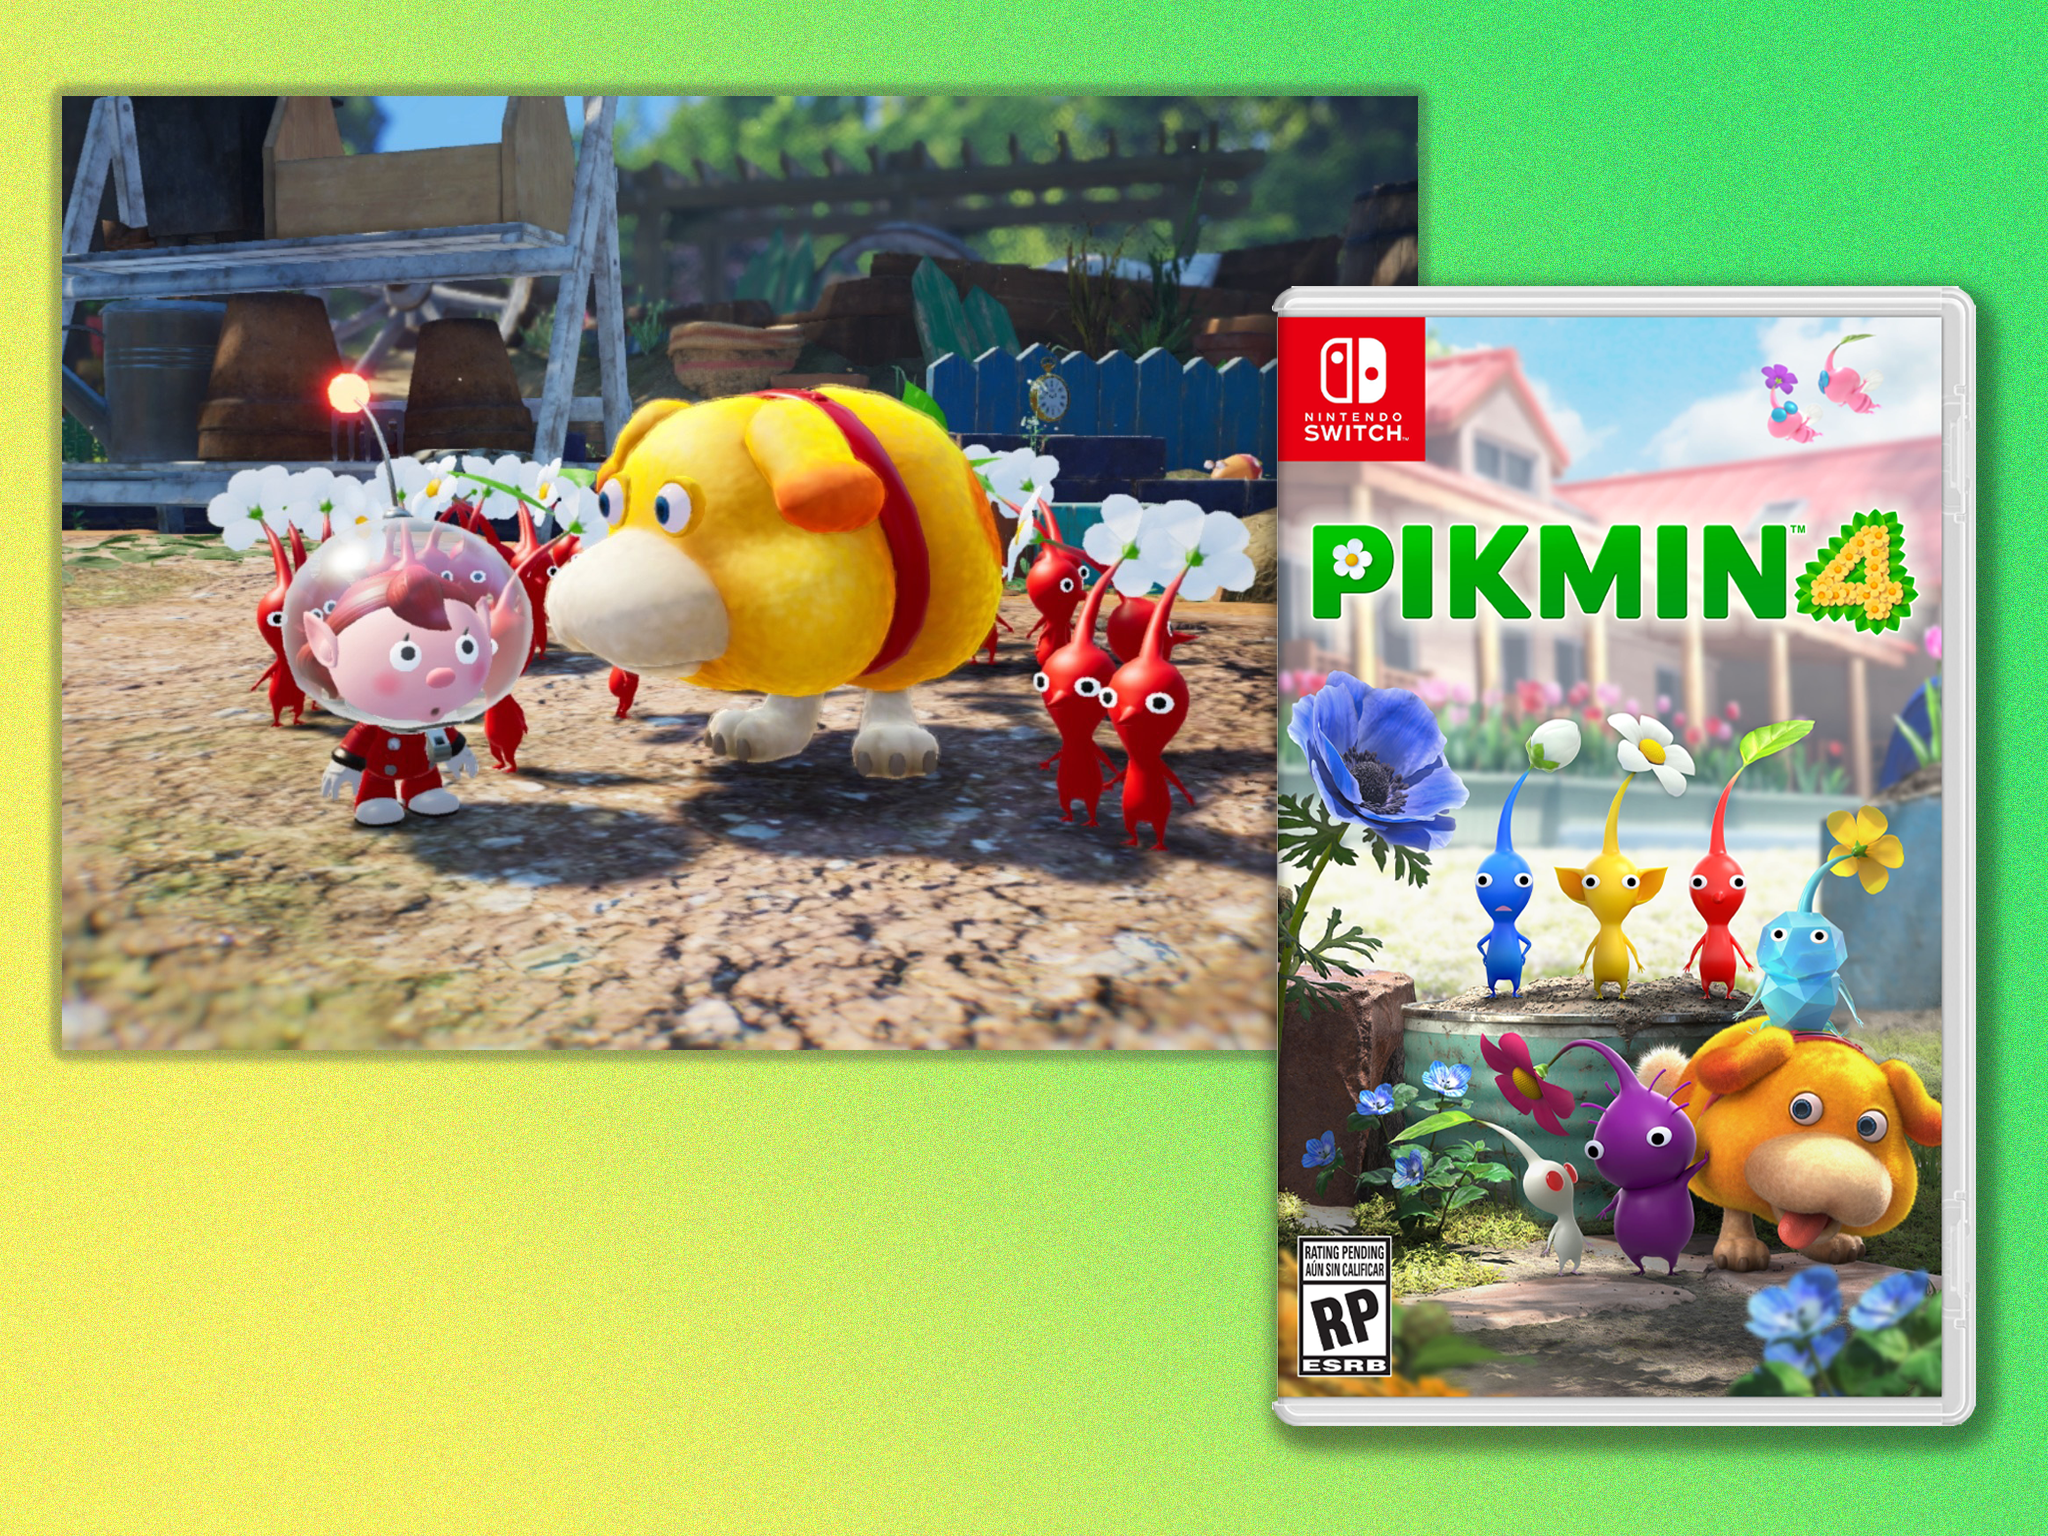 ‘Pikmin 4’ is a long-anticipated release – it’s been 10 years since the most recent game in the series